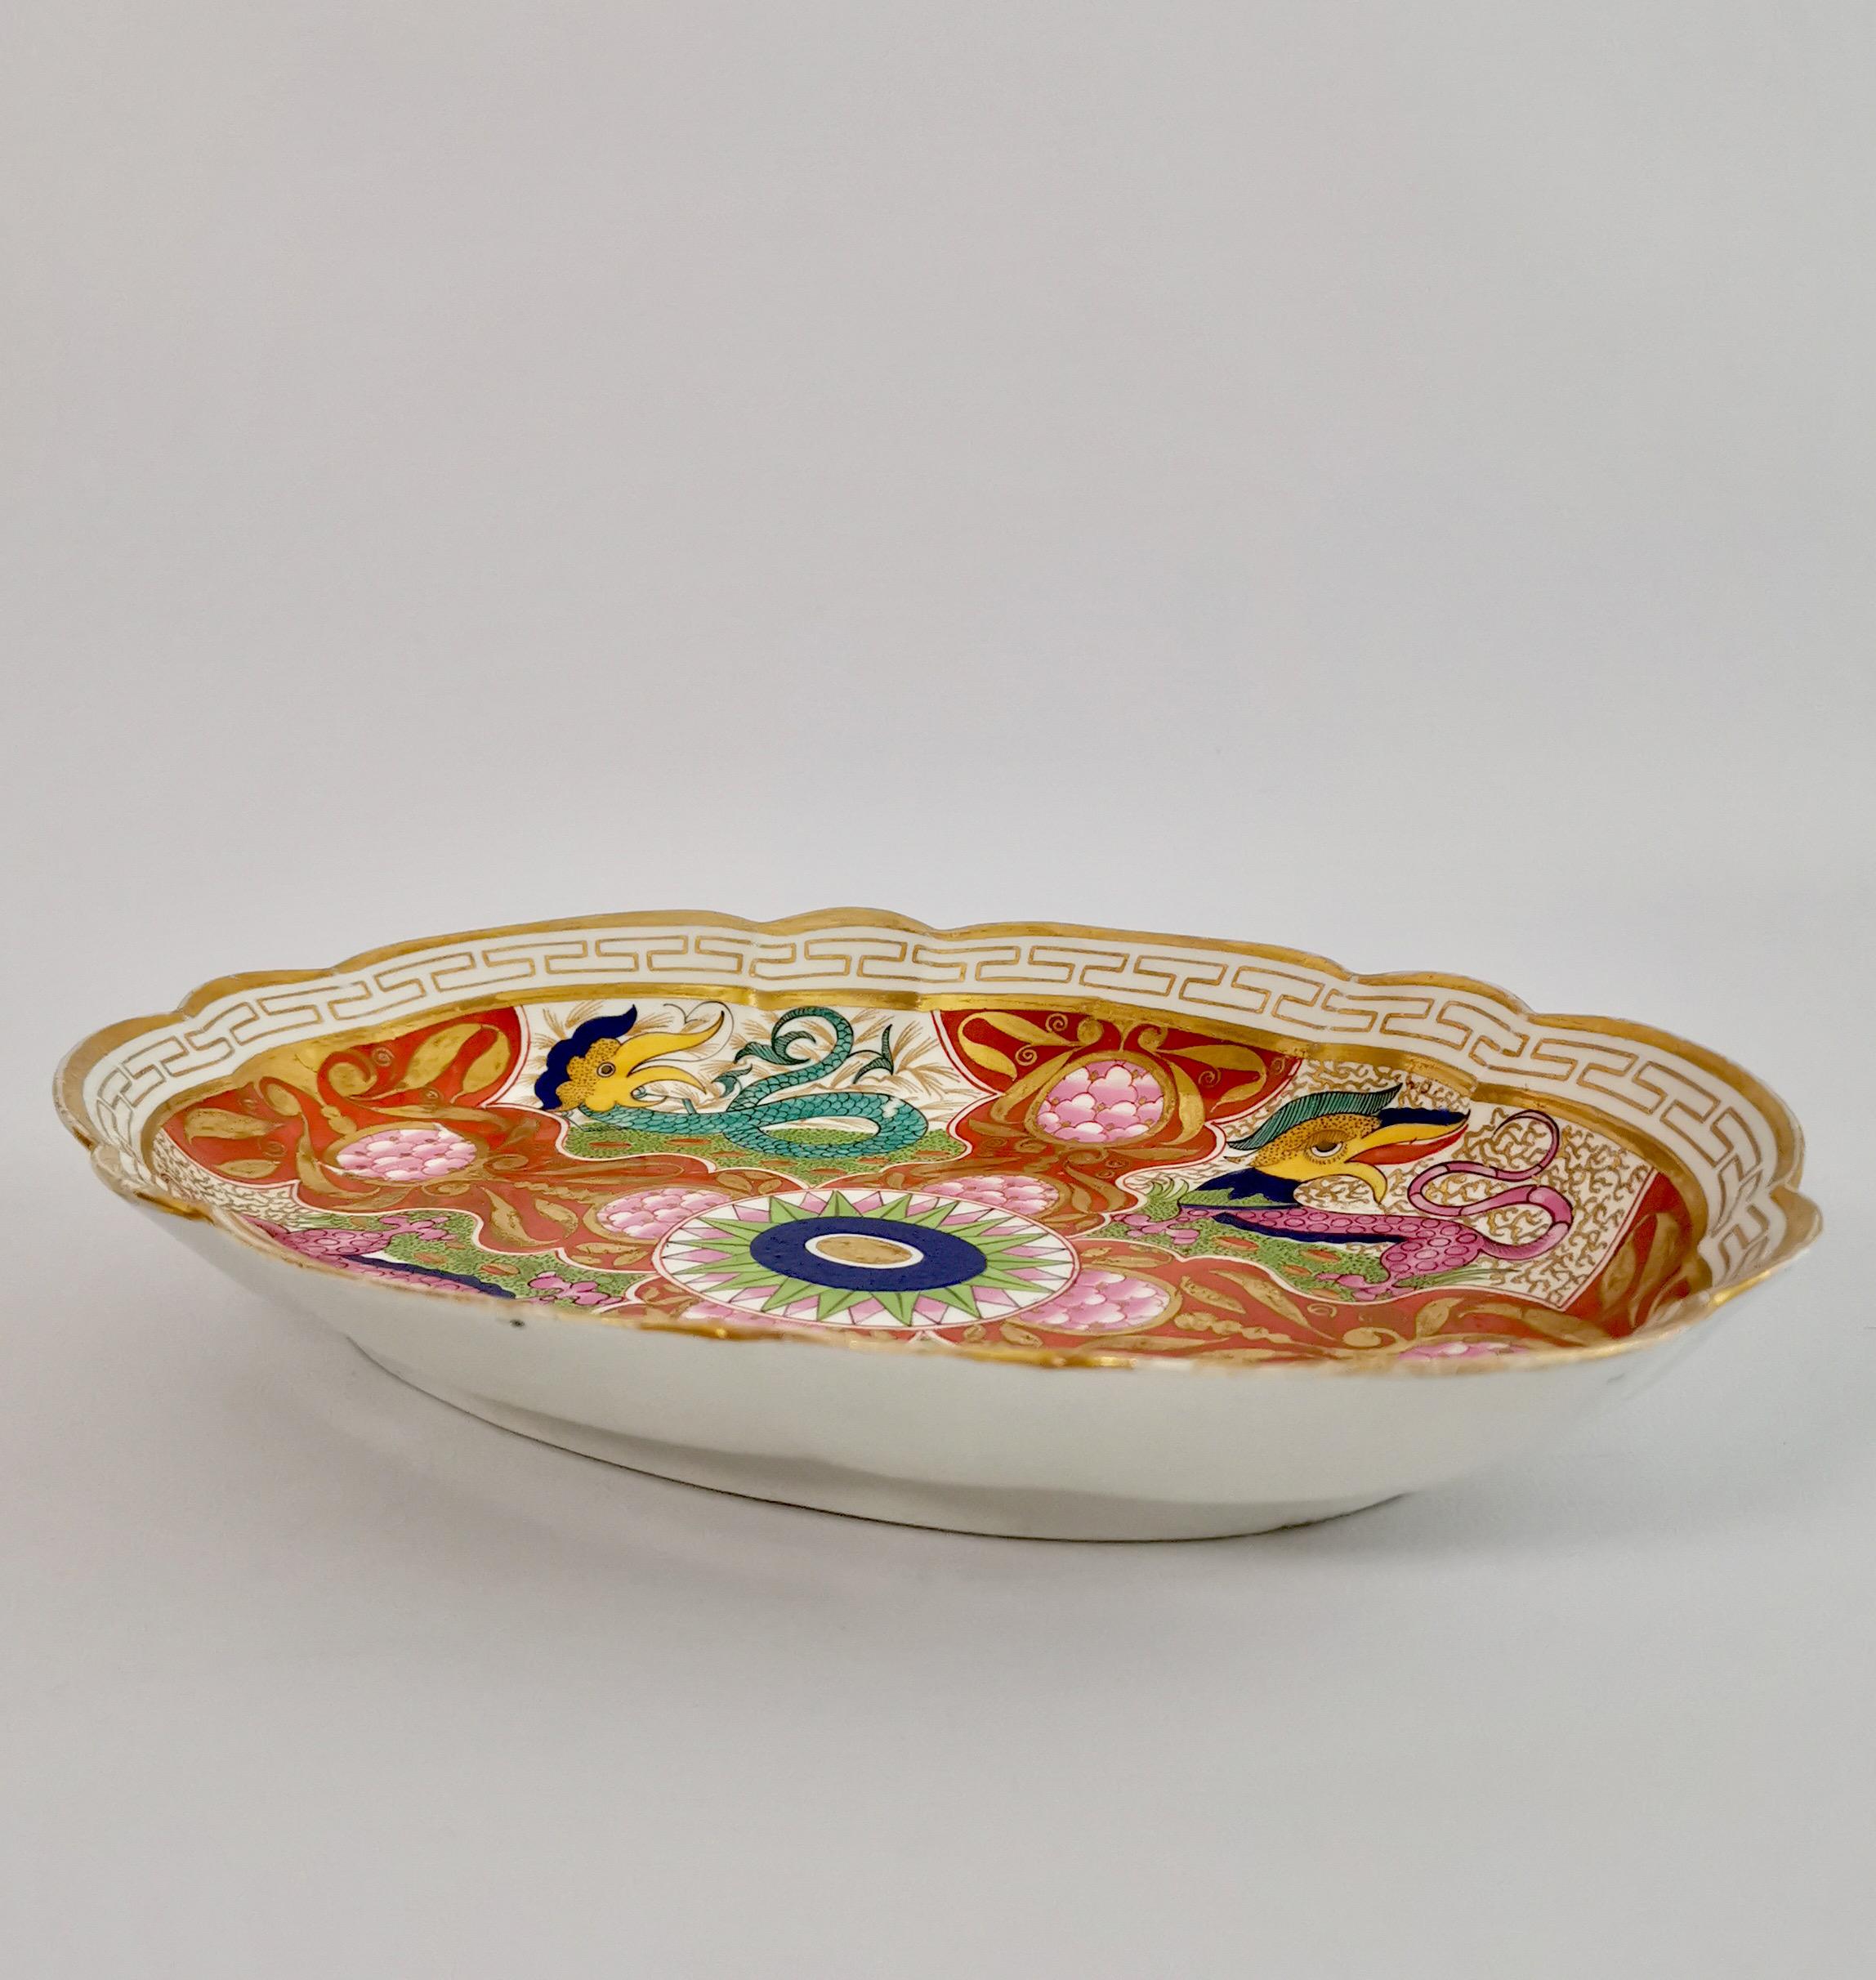 Barr Flight & Barr Oval Dish, Dragons in Compartments, Regency 1807-1813 3